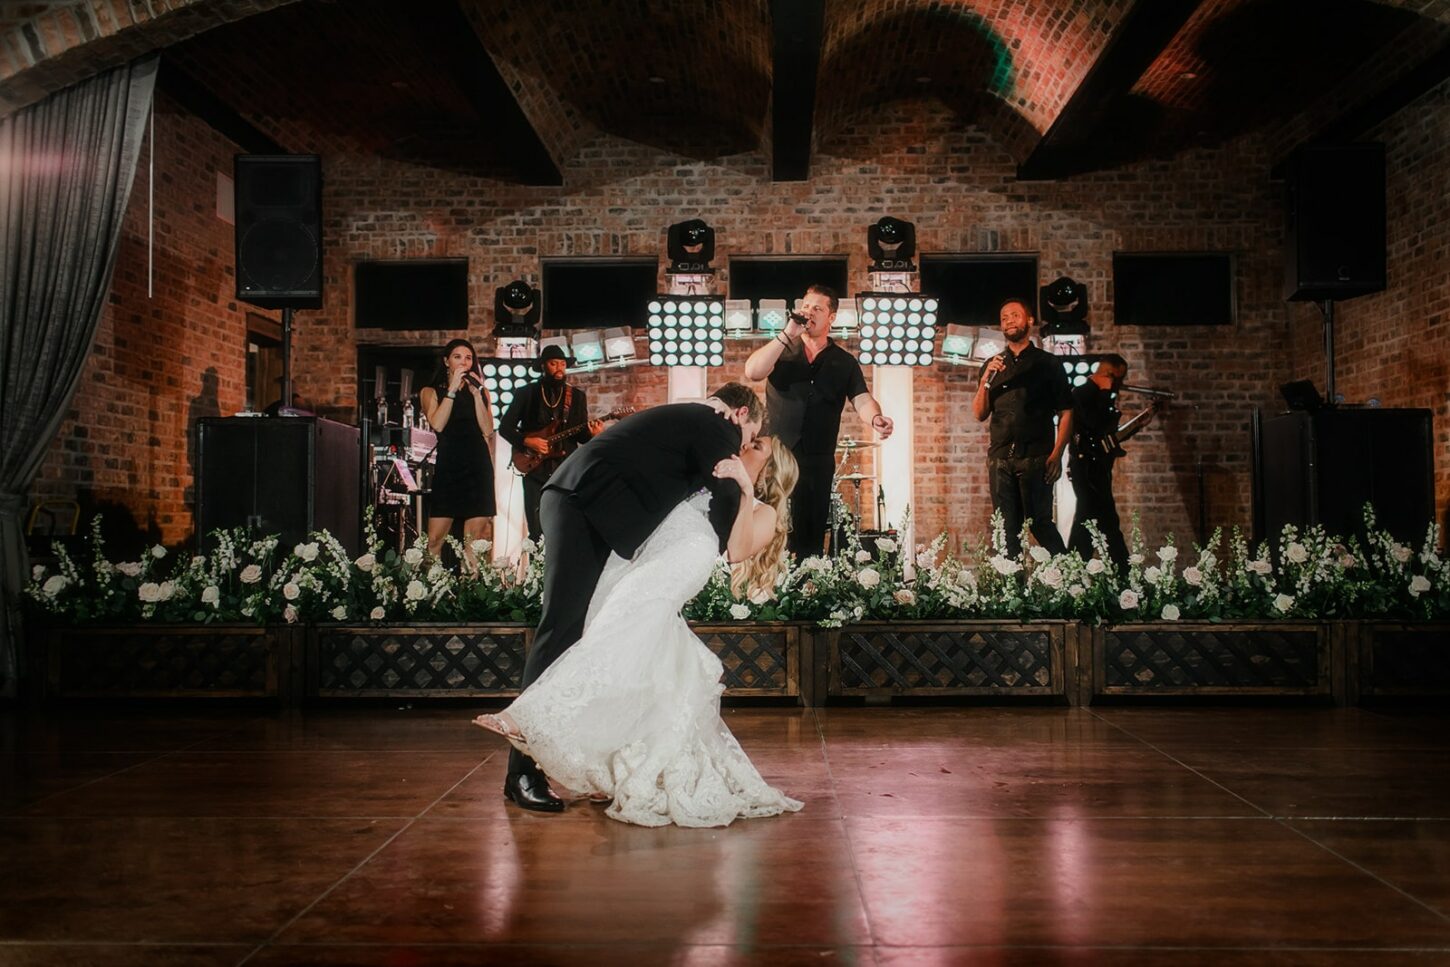 Bride and Groom's First Dance with In10City Band for their wedding